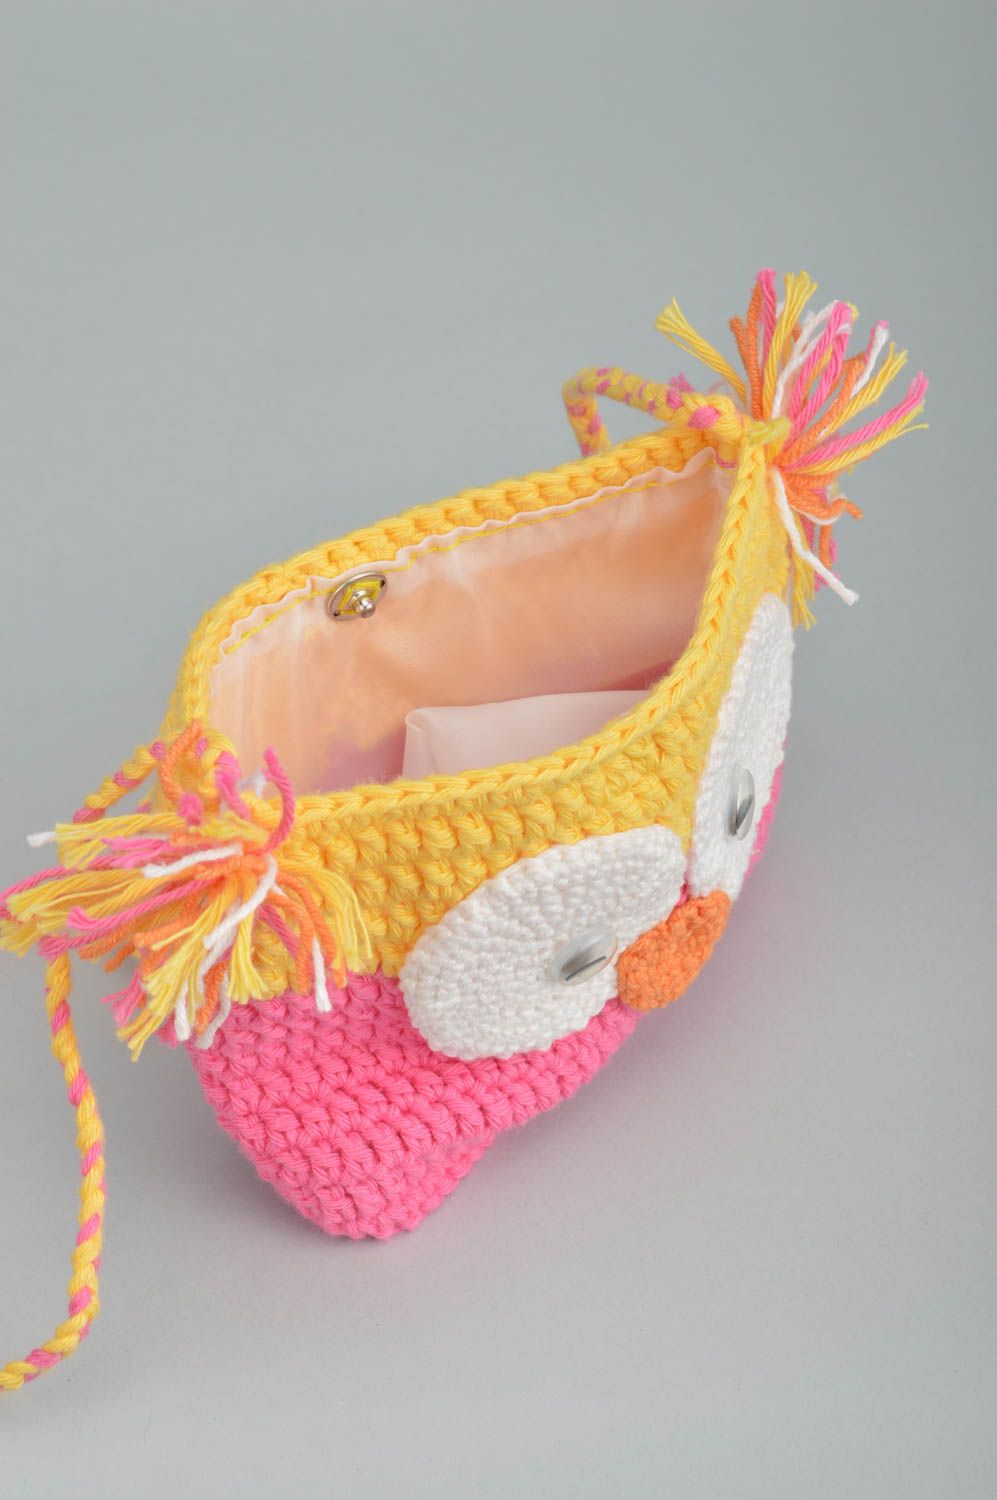 Handmade crocheted beautiful yellow and pink bag for kids in shape of owl photo 5